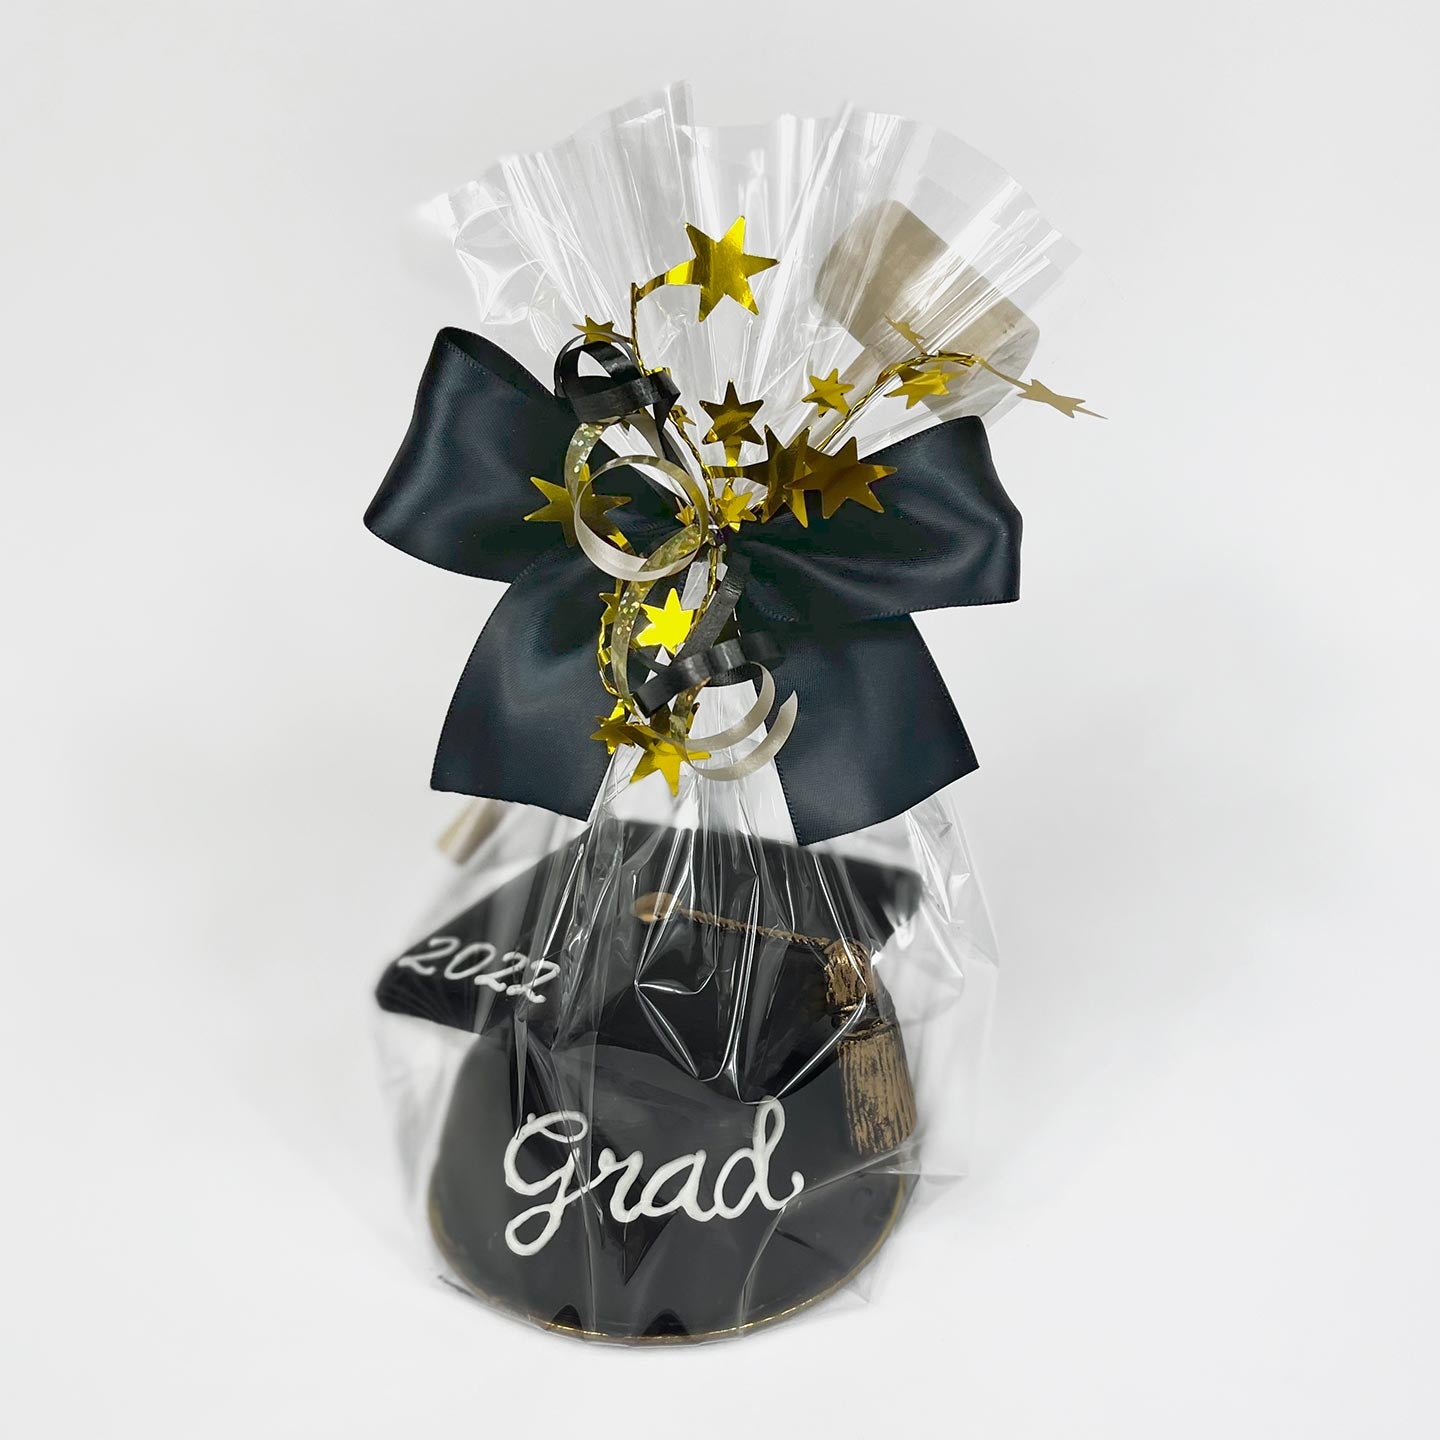 A black chocolate graduation cap is shown wrapped in cellophane with a black bow, silver ribbon, and metallic gold stars.